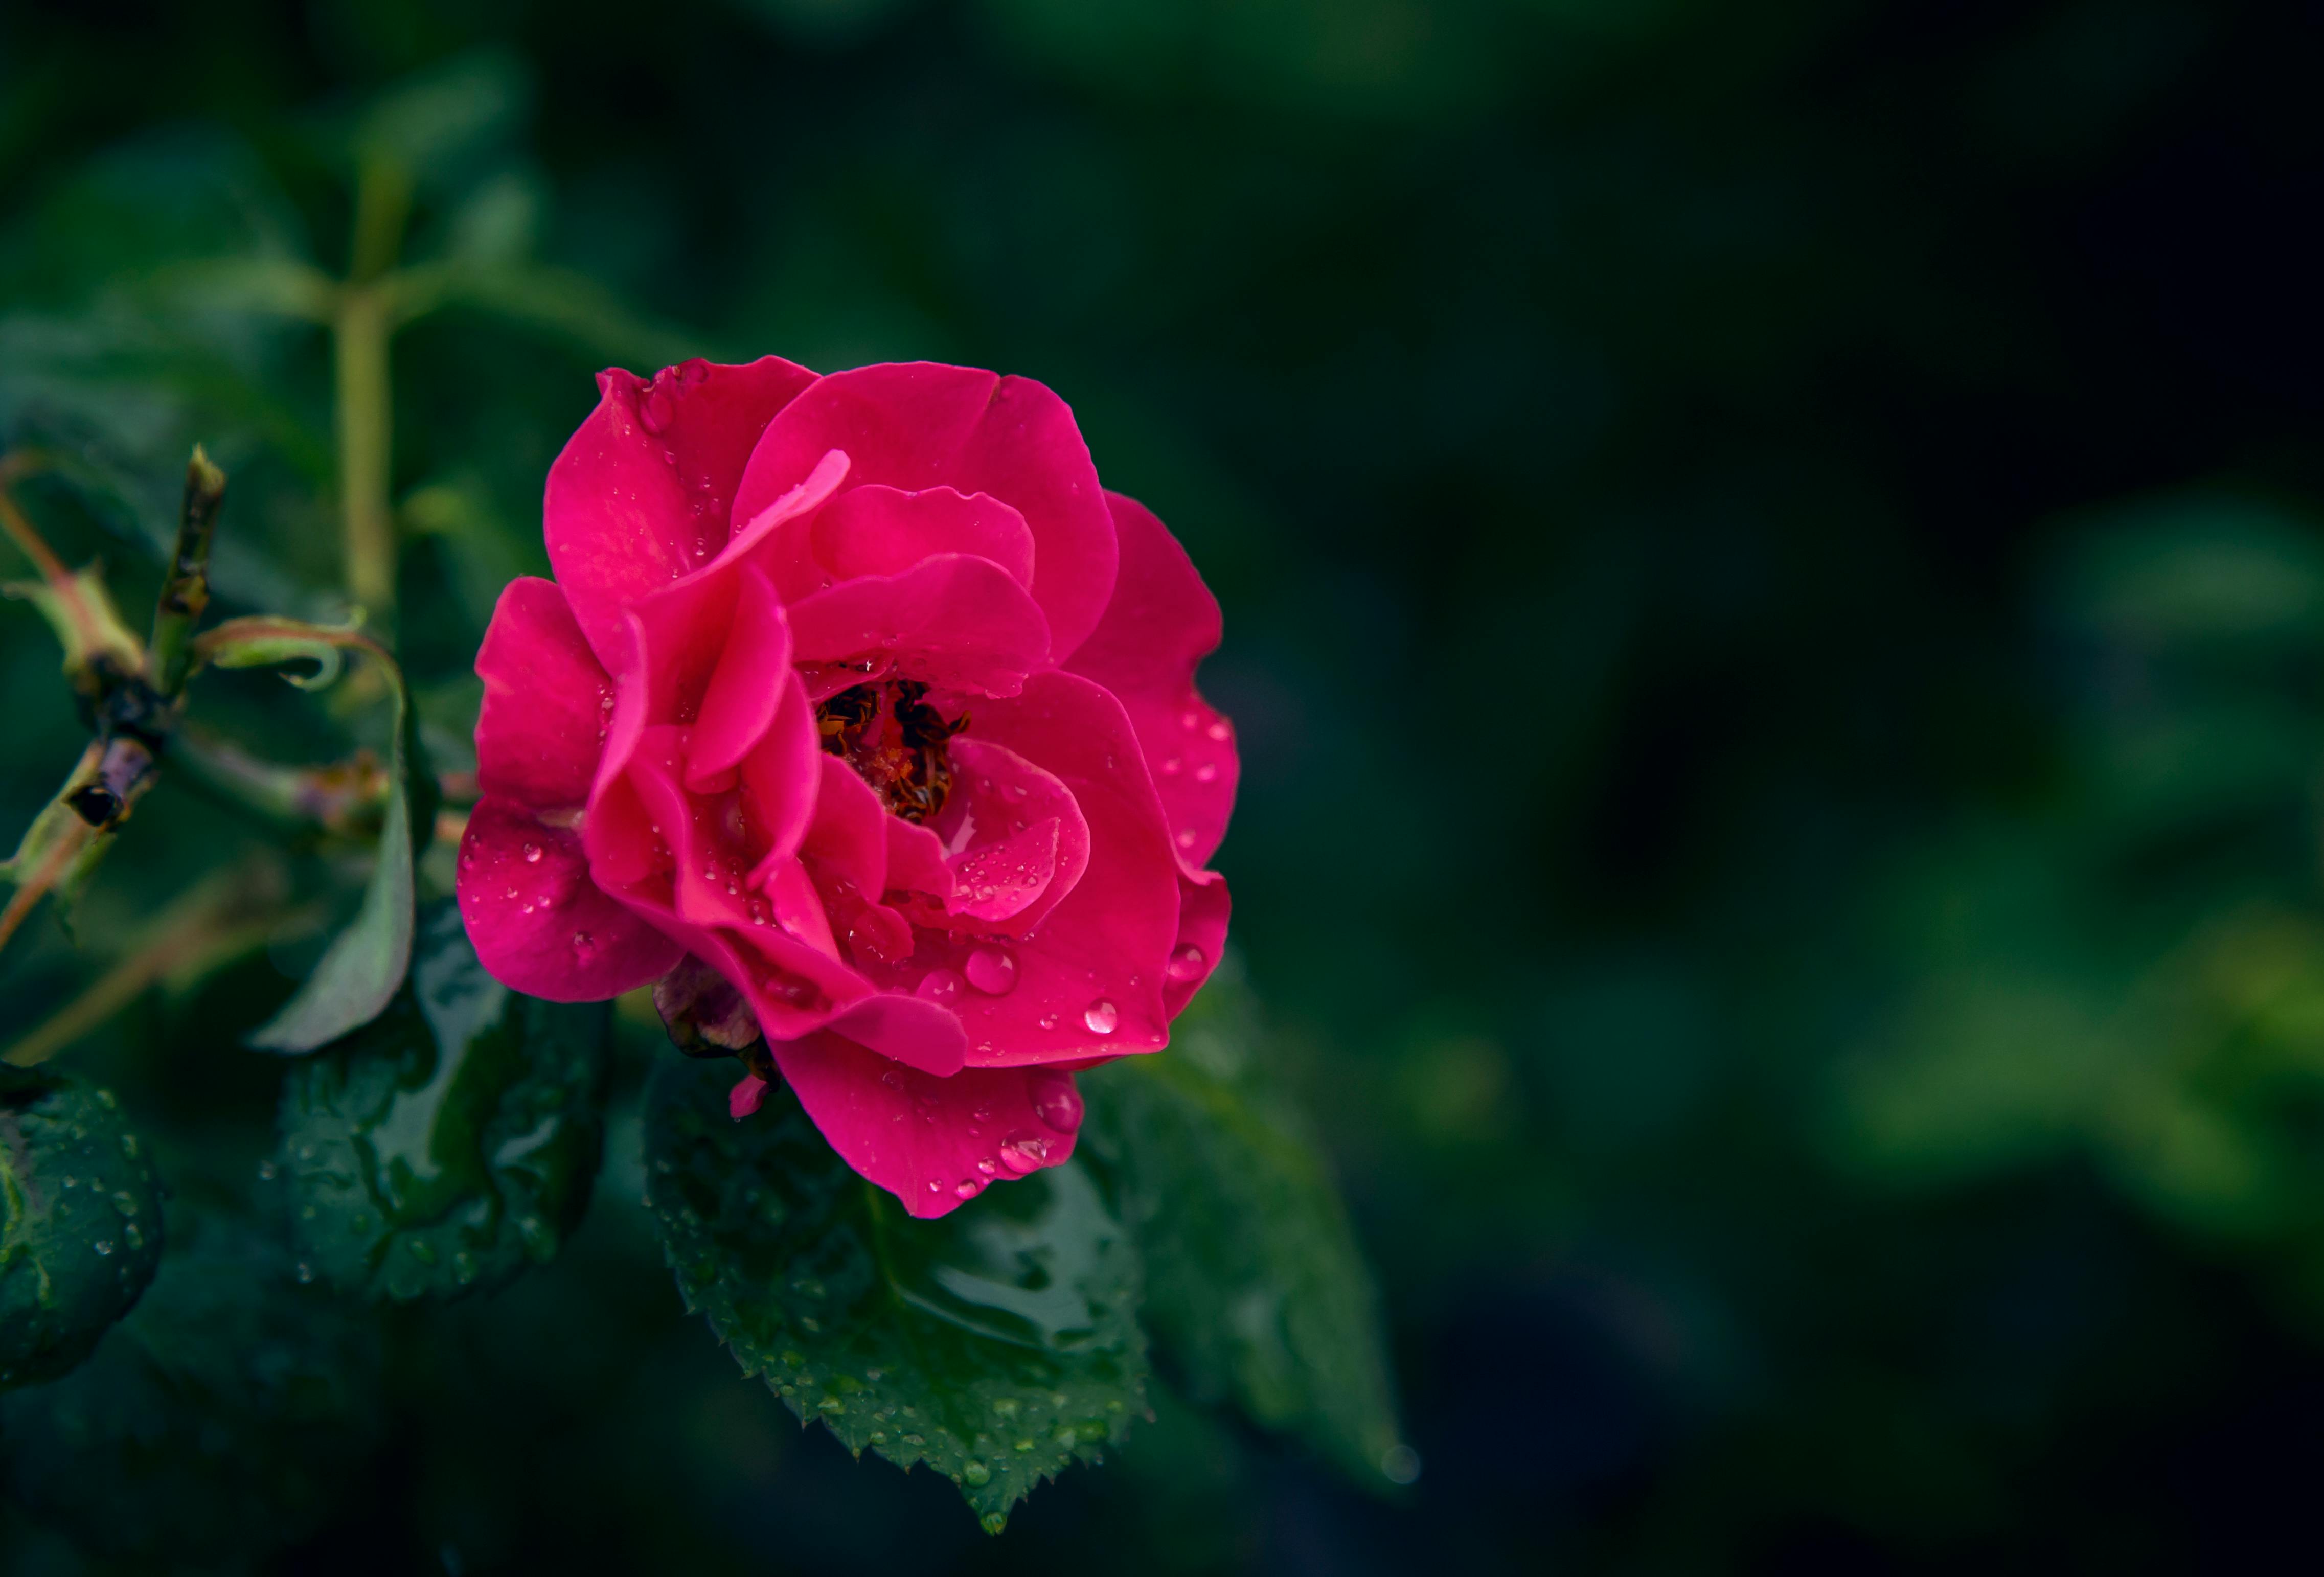 Wallpaper Garden flowers, pink roses 1920x1080 Full HD 2K Picture, Image